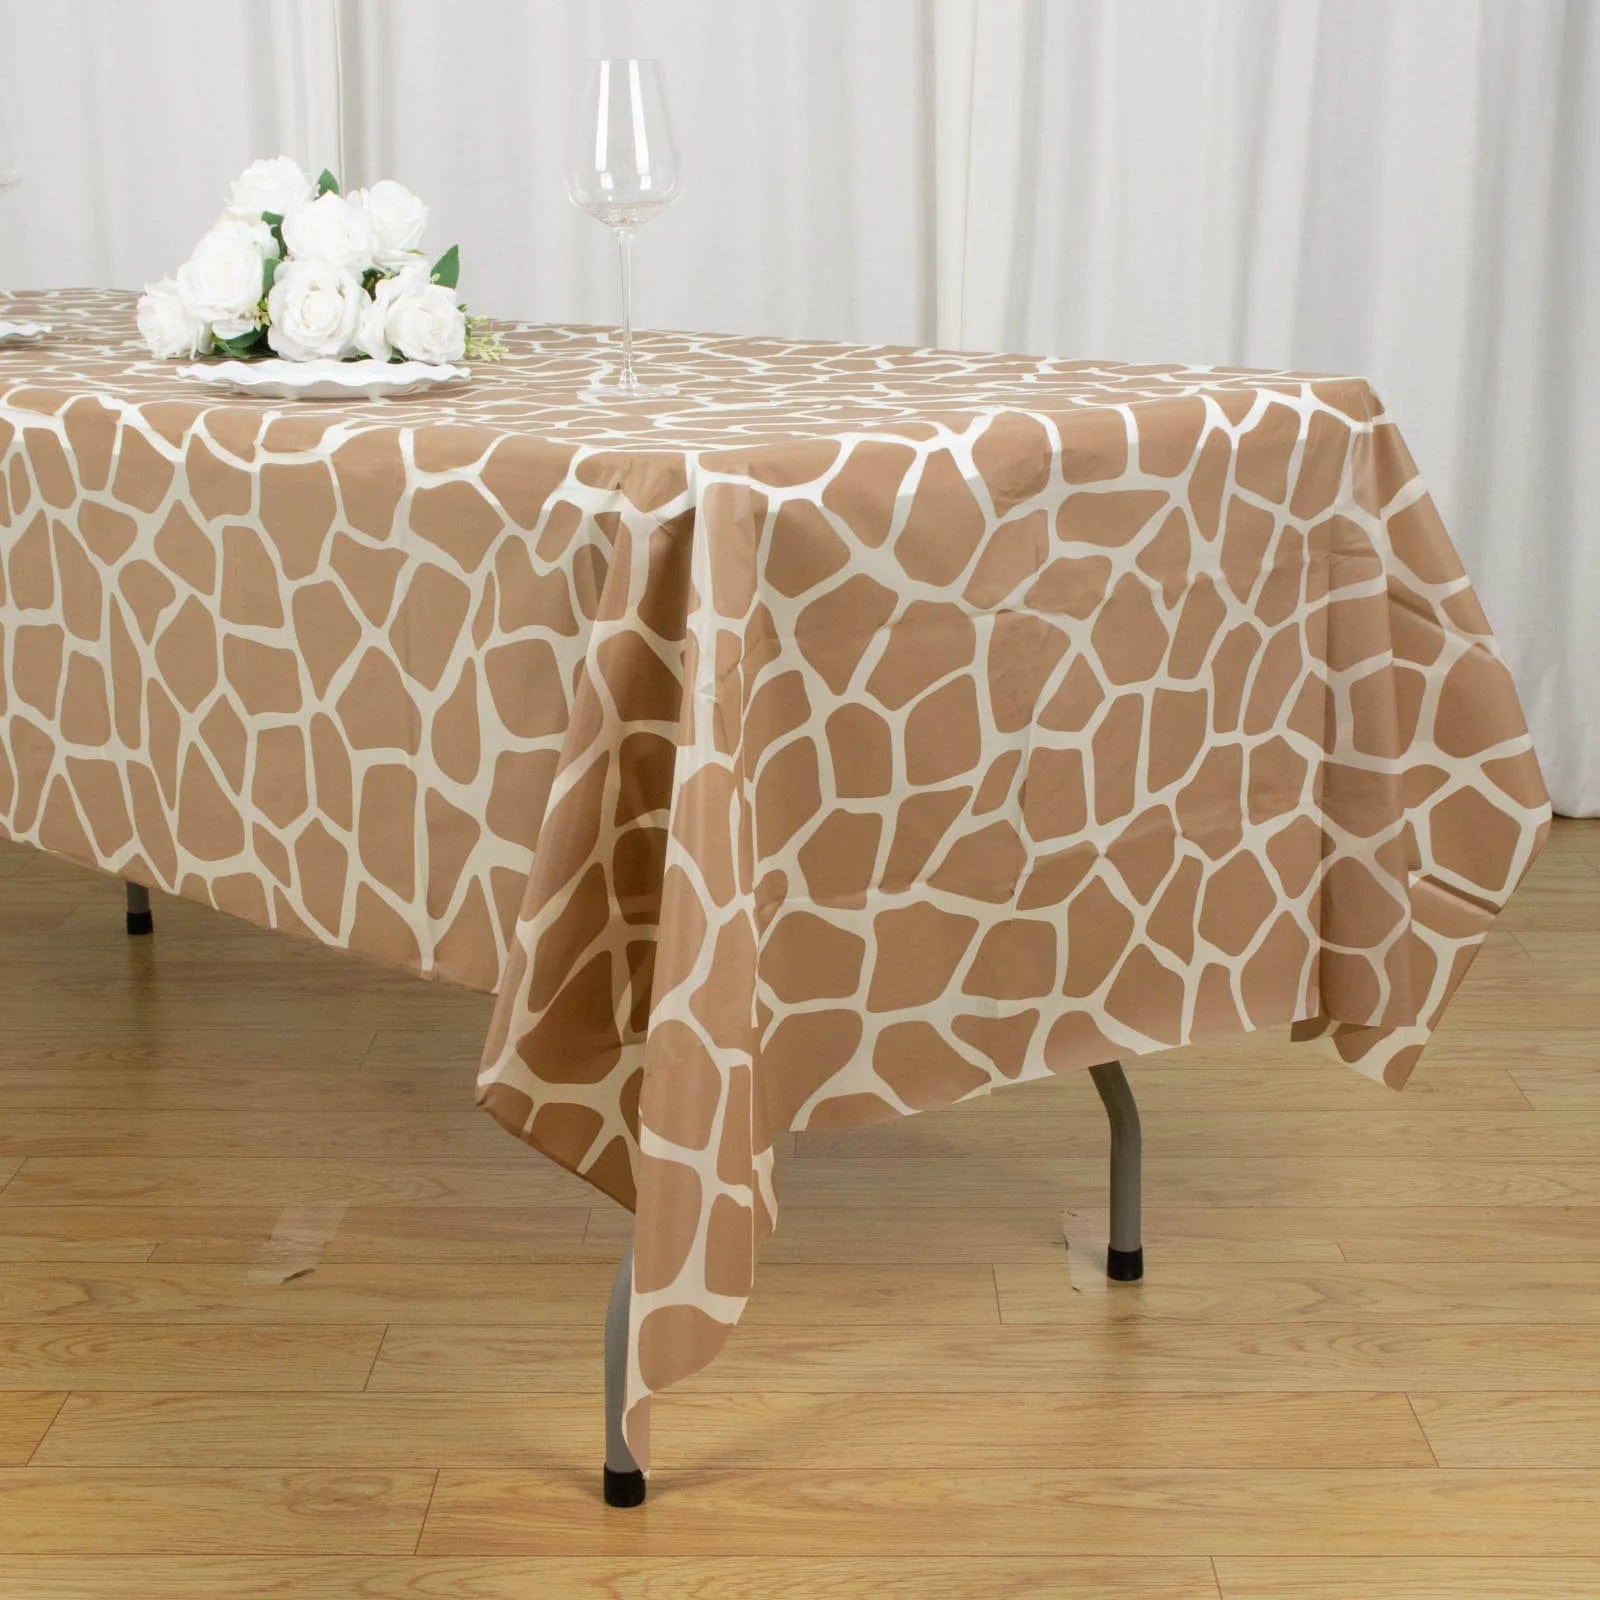 5 Assorted 54x108 in Rectangular Disposable Plastic Tablecloths with Animal Safari Designs